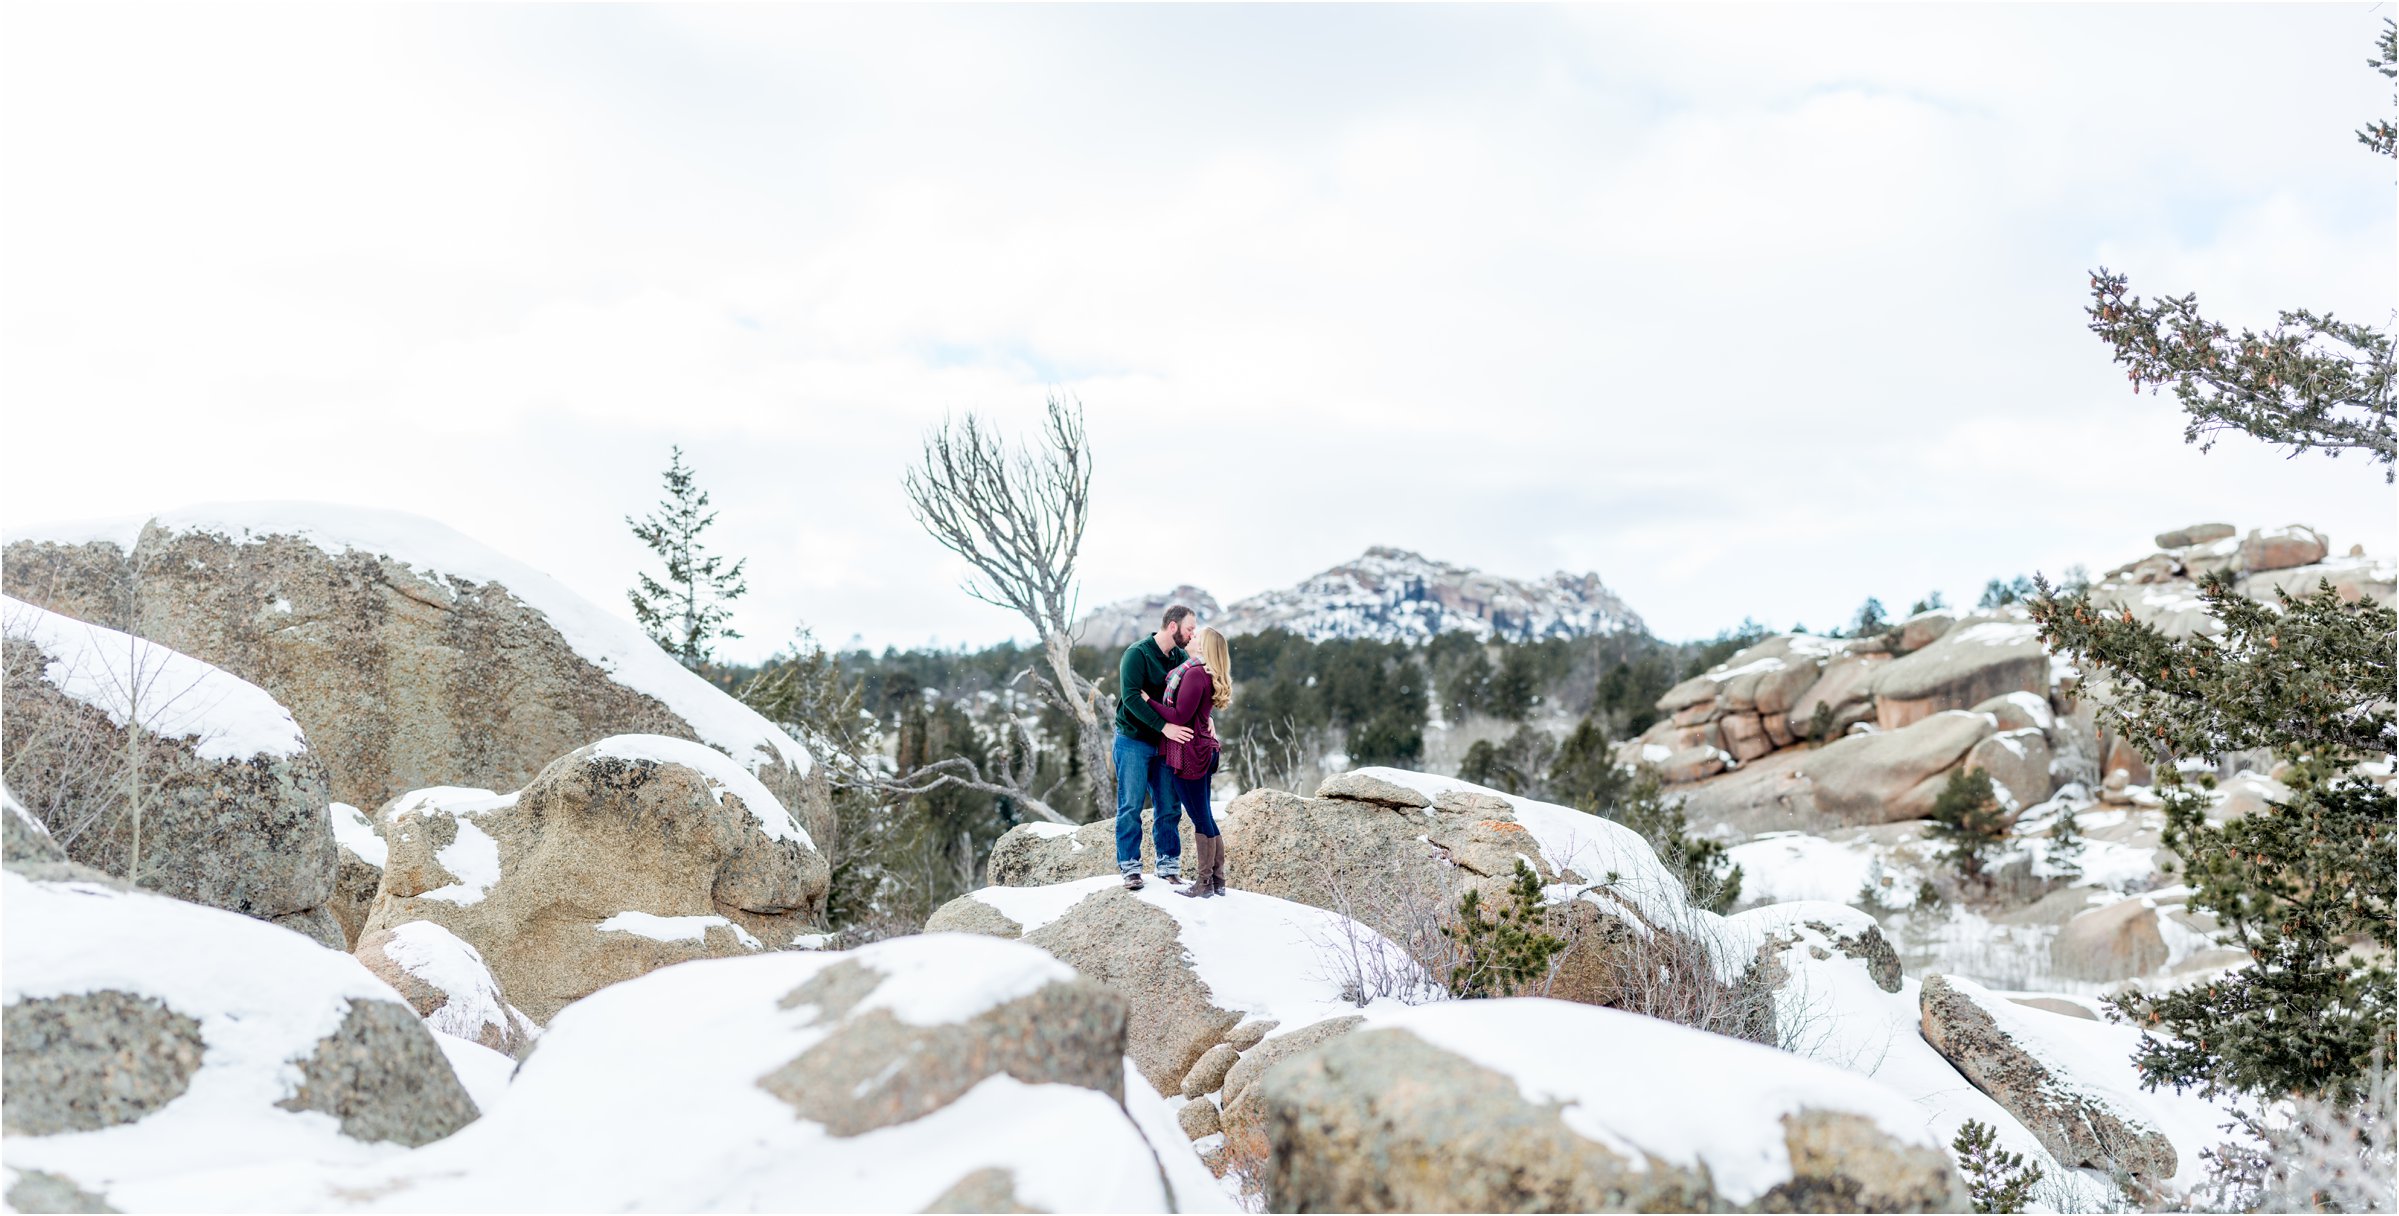 Cheyenne, Wyoming Engagement Session at Vedauwoo by Greeley, Colorado Wedding Photographer